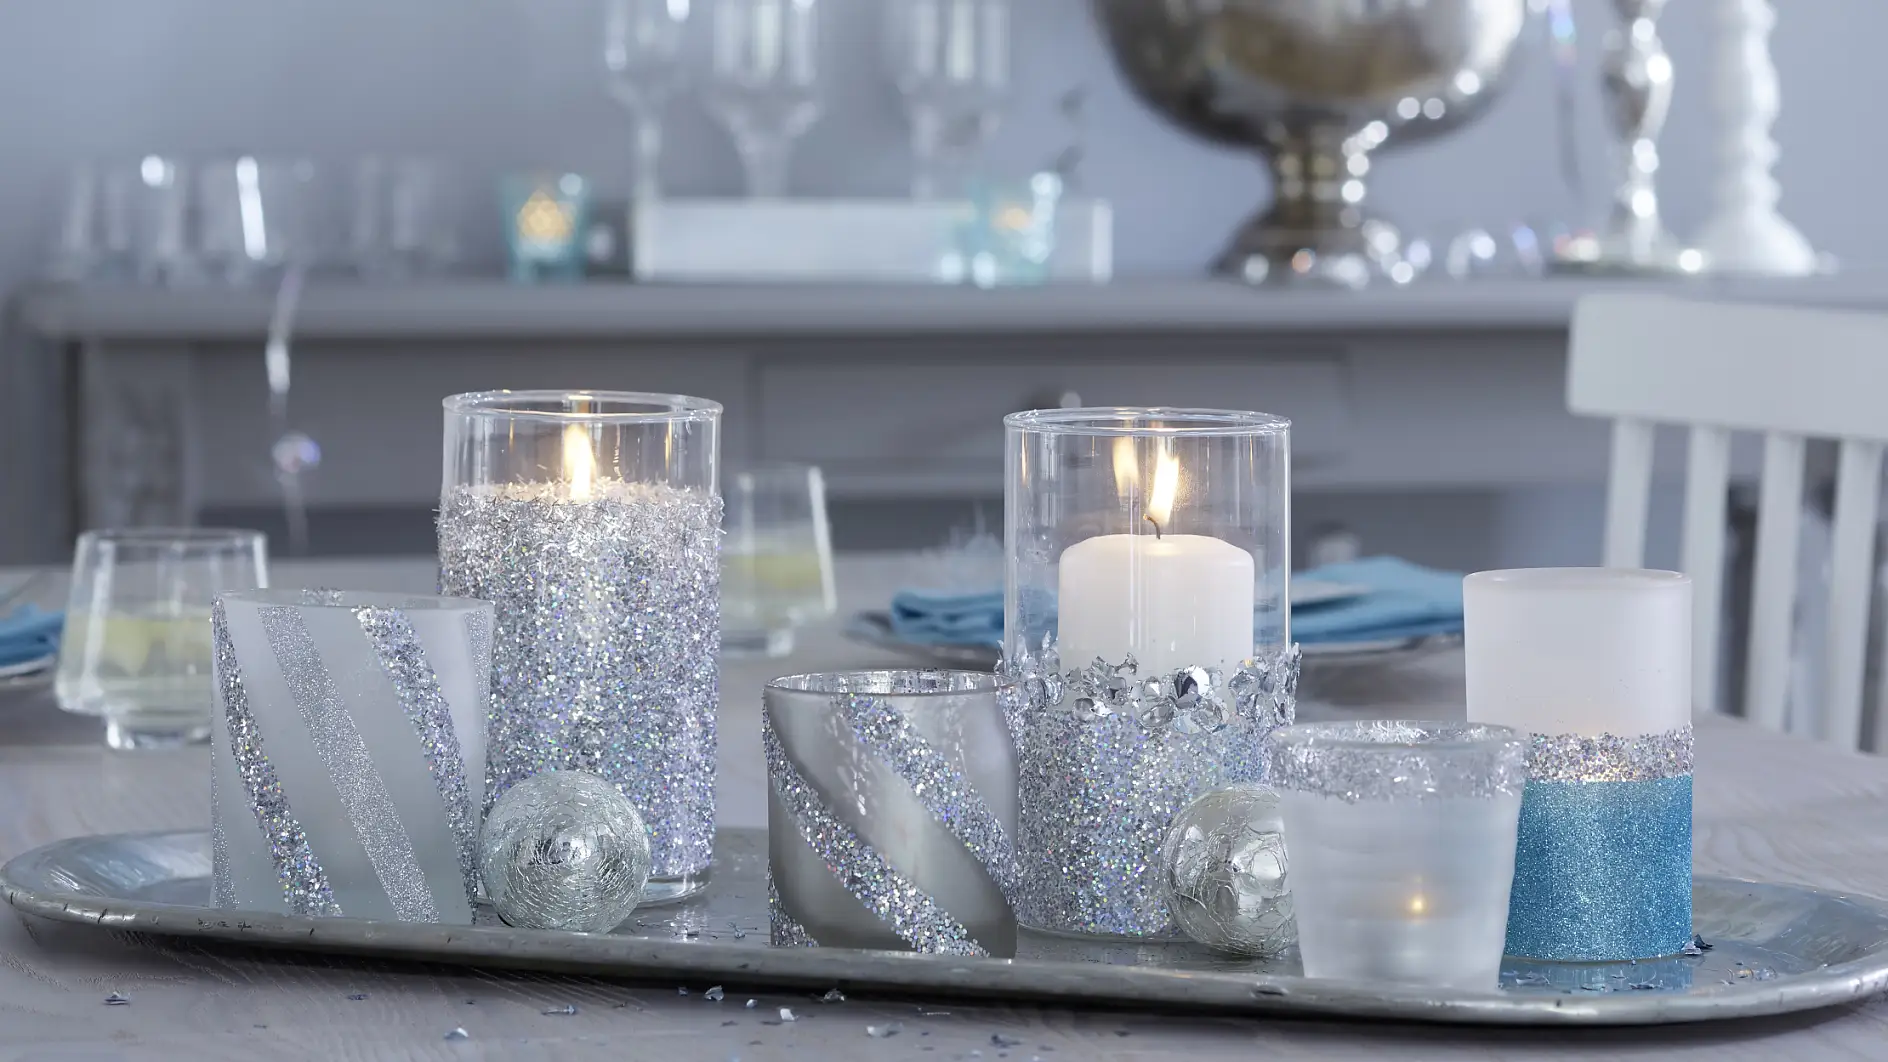 Simply fabulous: Disco Fever! Let's spend a glamorous New Year's Eve at home. These candle jars not only look great, but can also be created in no time.